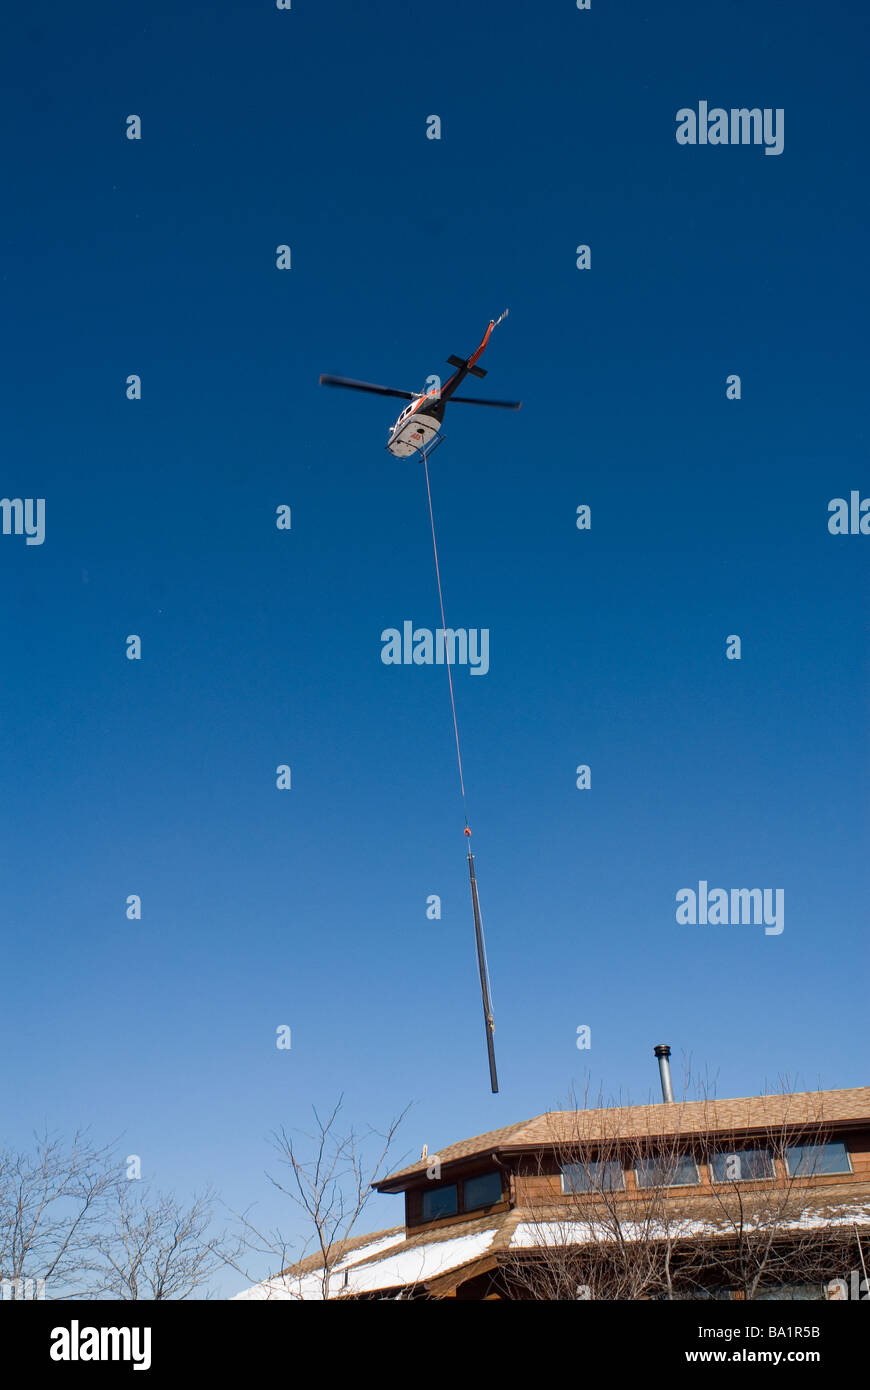 A helicopter is used to place a new utility pole on a hillside Stock Photo